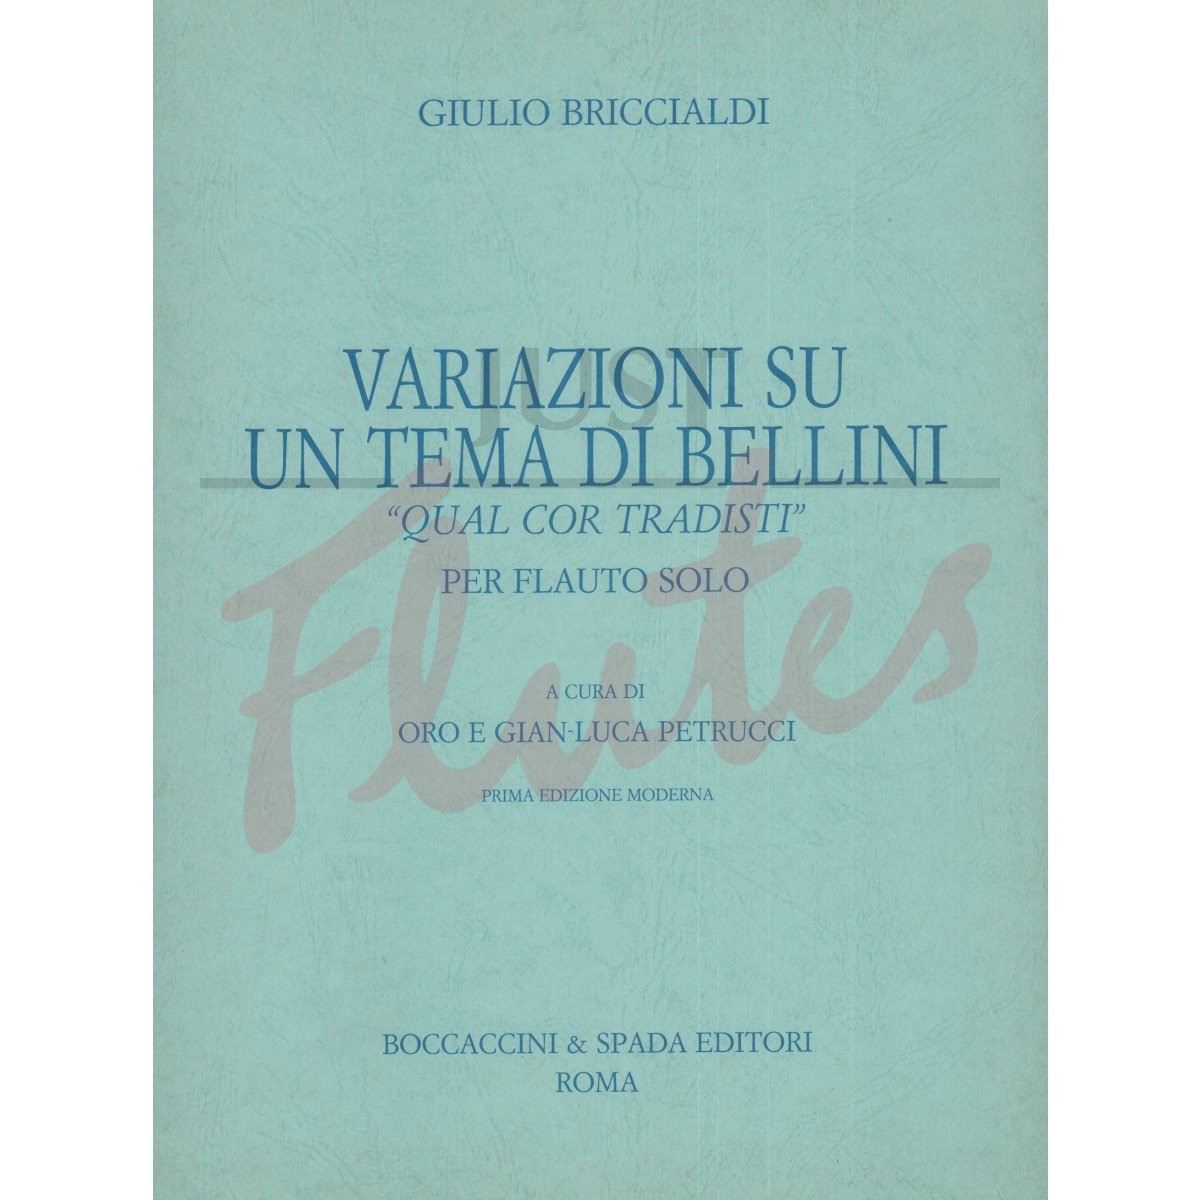 Variations On A Theme Of Bellini for Solo Flute